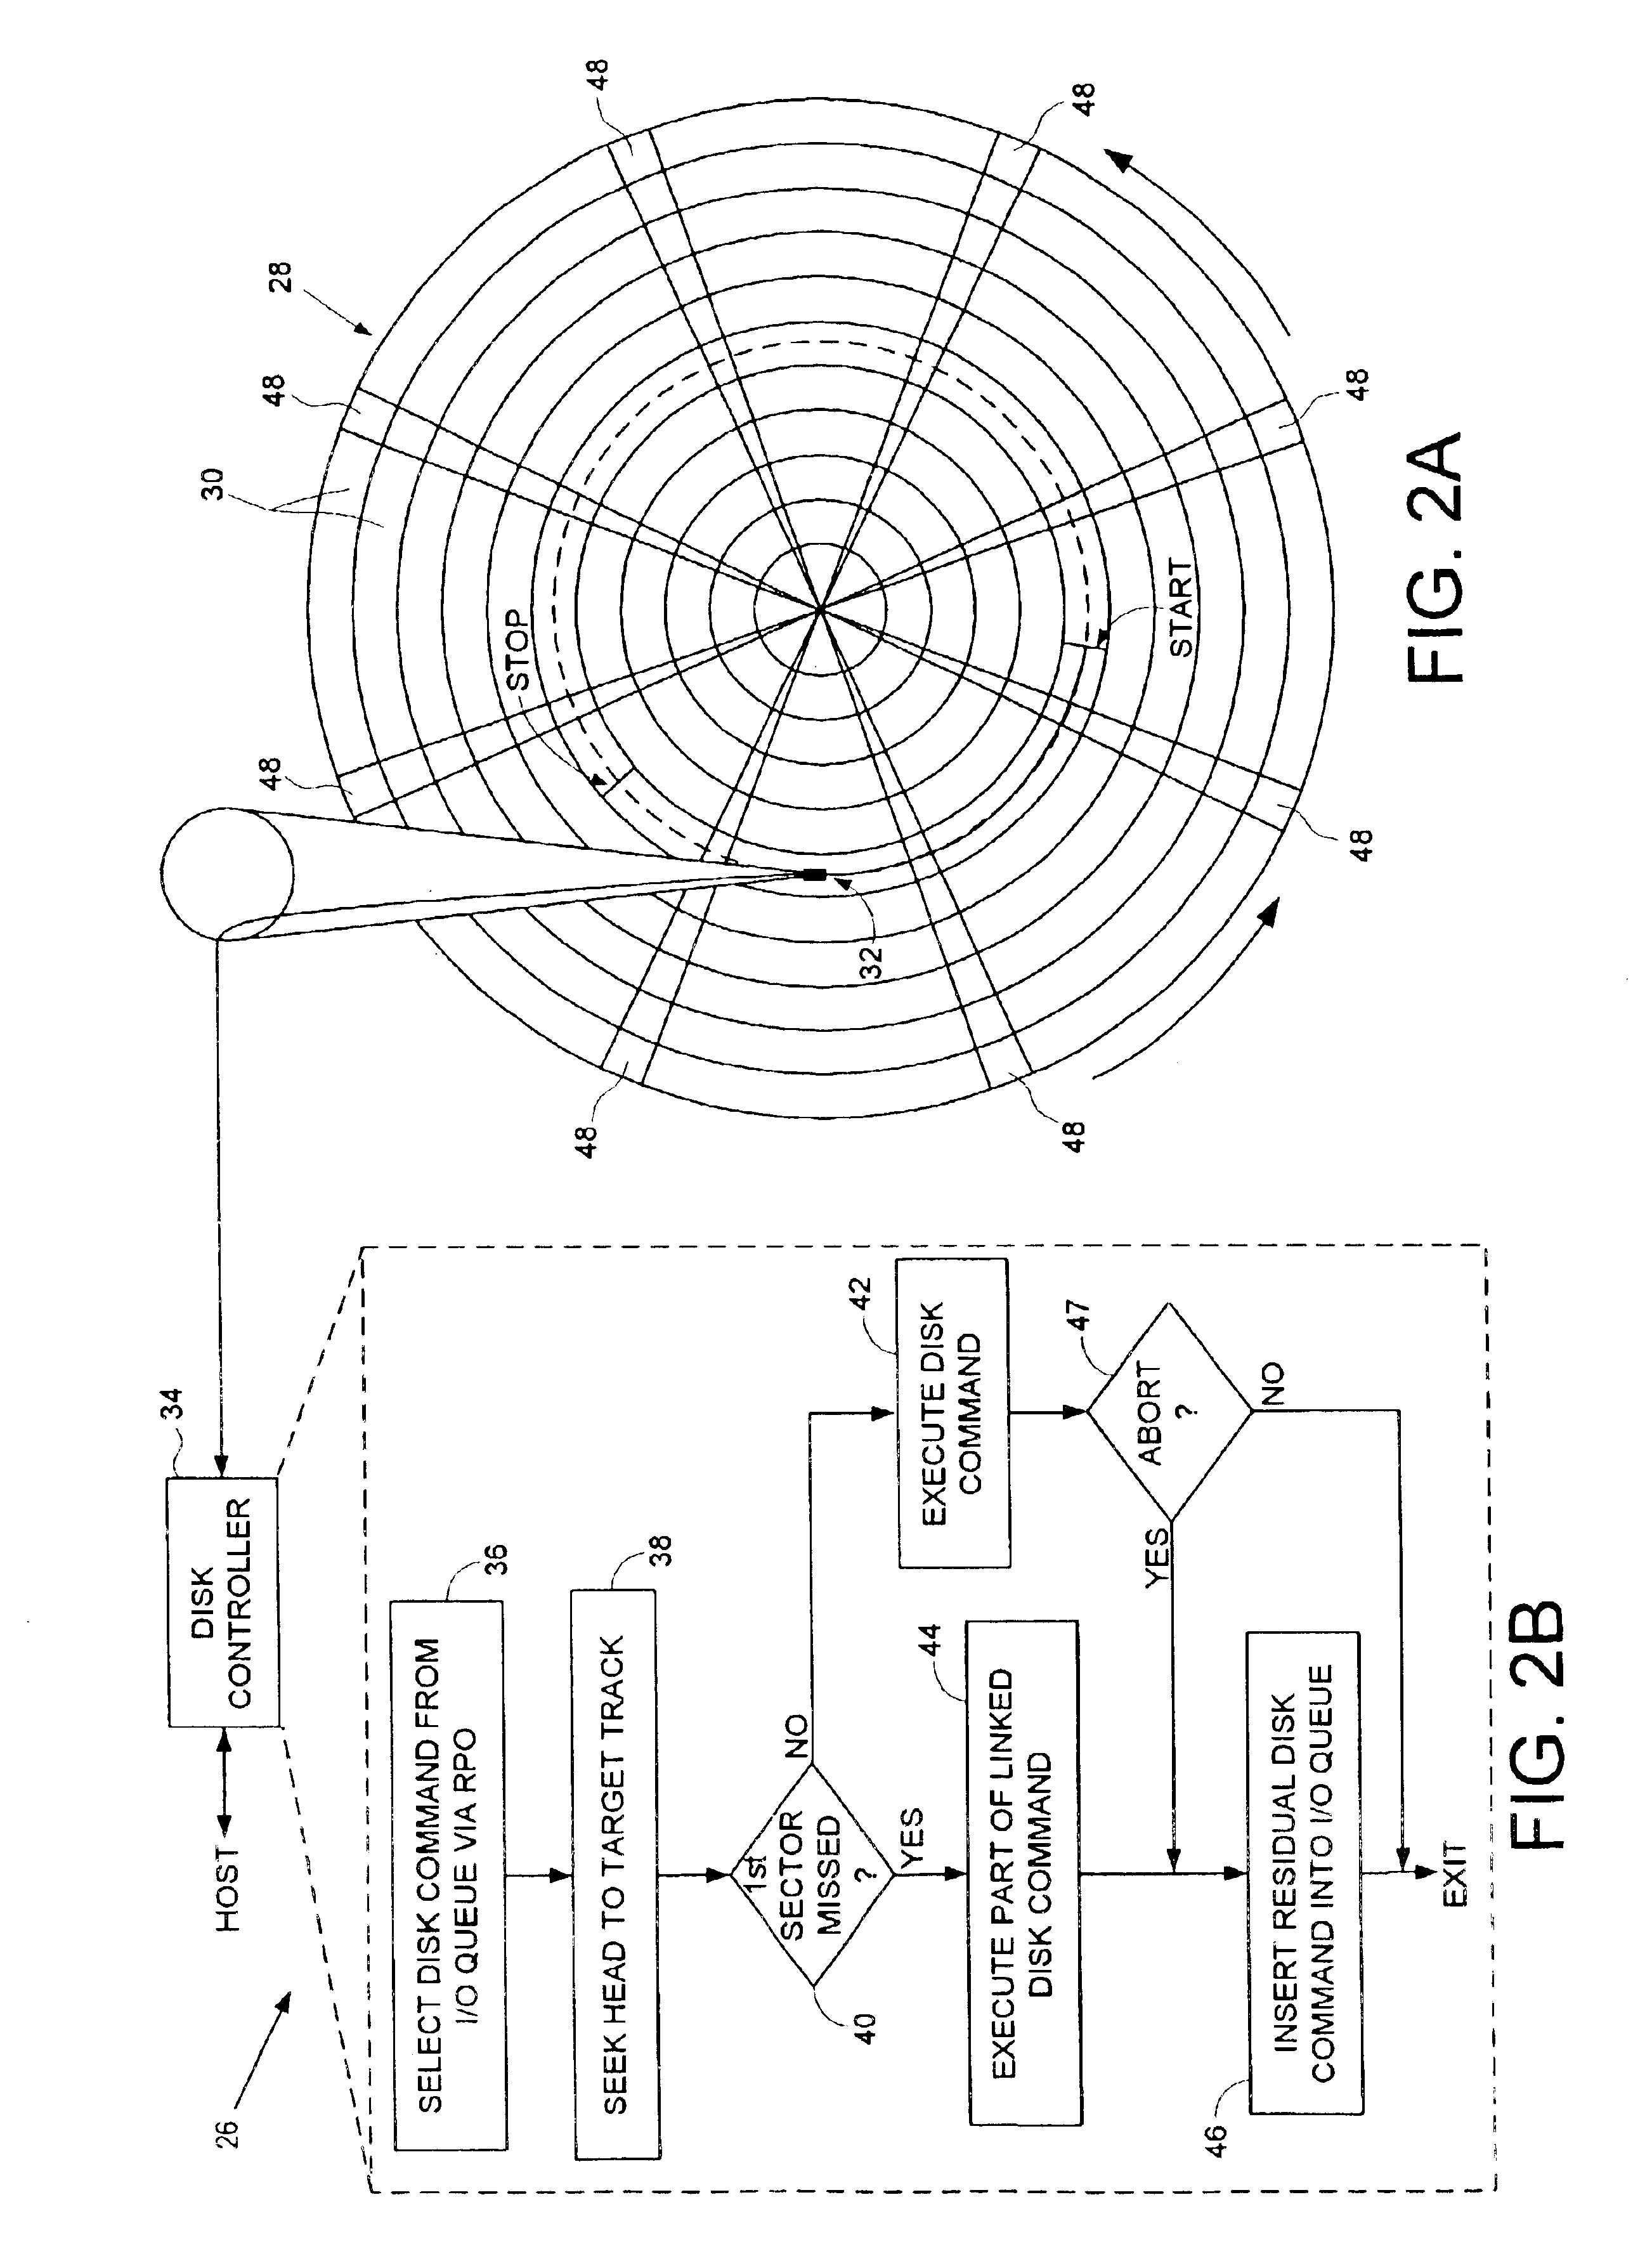 Disk drive executing part of a linked disk command